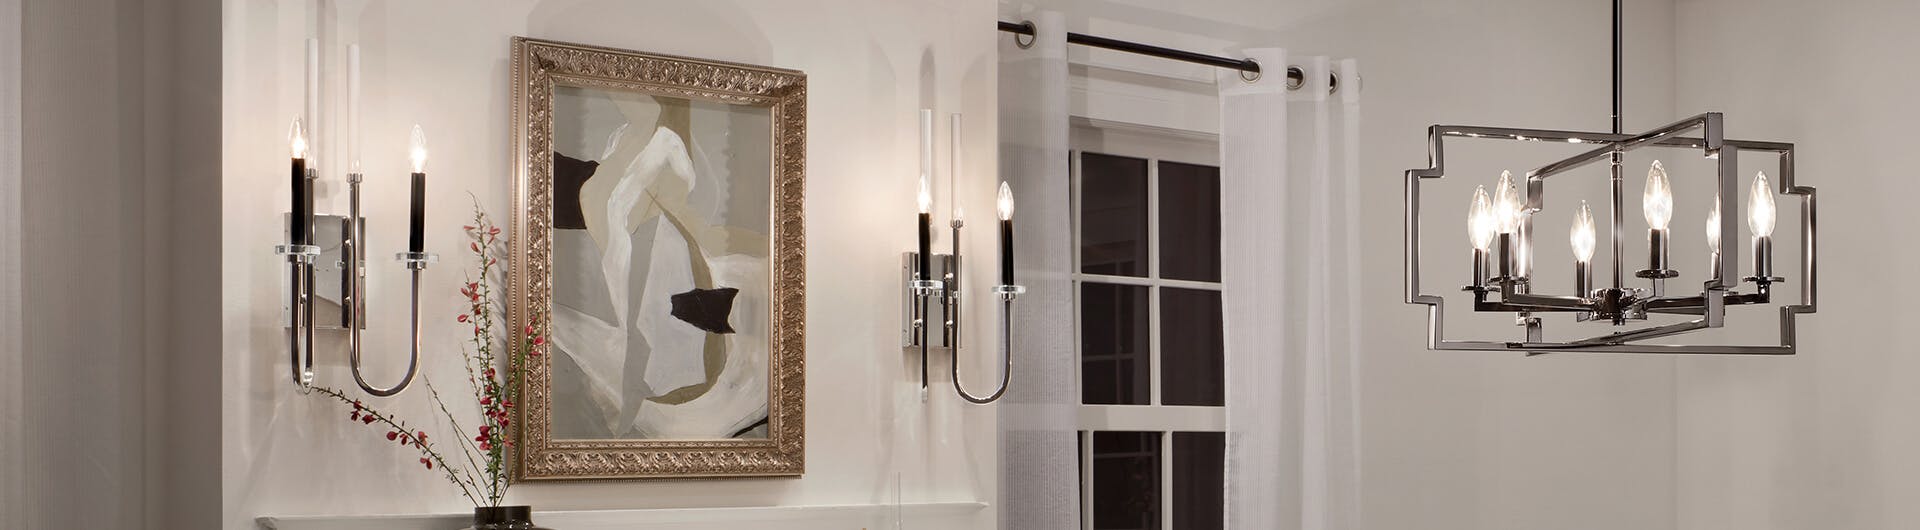 Header image of Kadas and Horizon chandelier and wall sconce lights at night